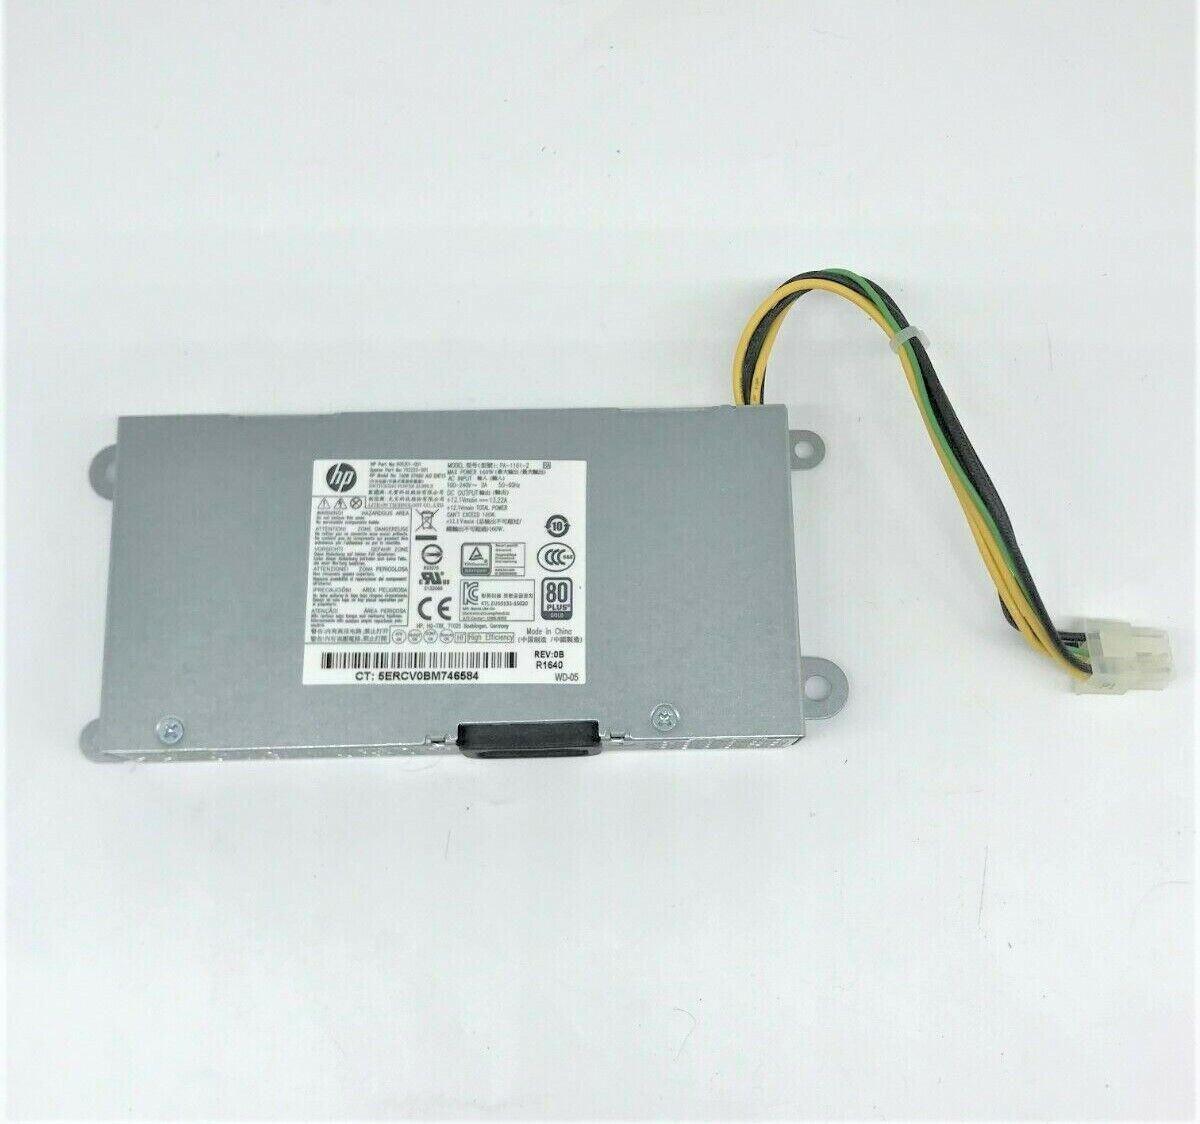 905301 003 DPS 160AB 5 792199 001 792225 001 power supply rated at 160w output 90 energy efficient 12v